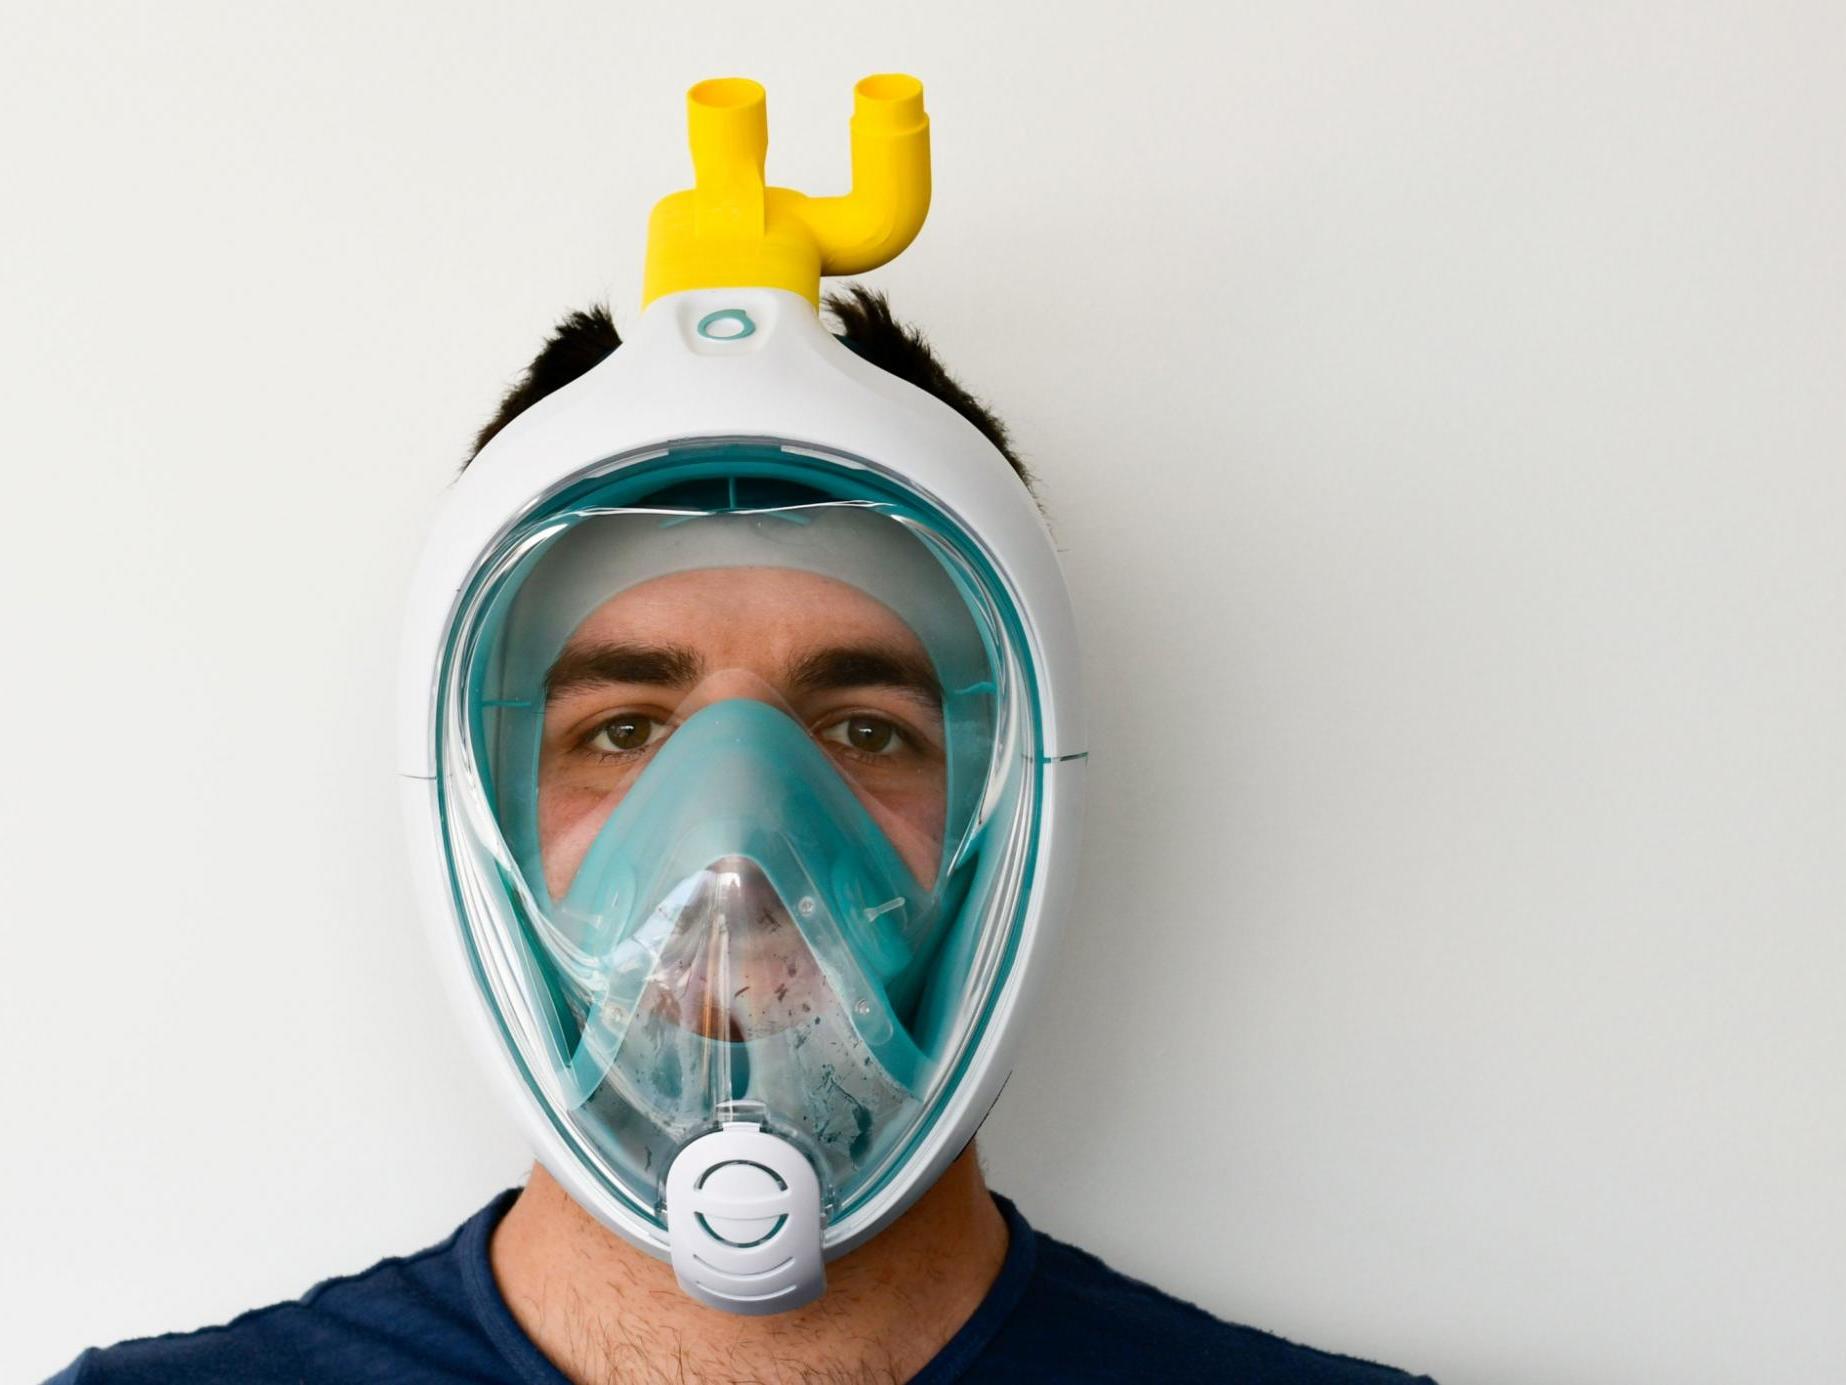 A 3D printing company has found a way to turn snorkelling masks into hospital equipment